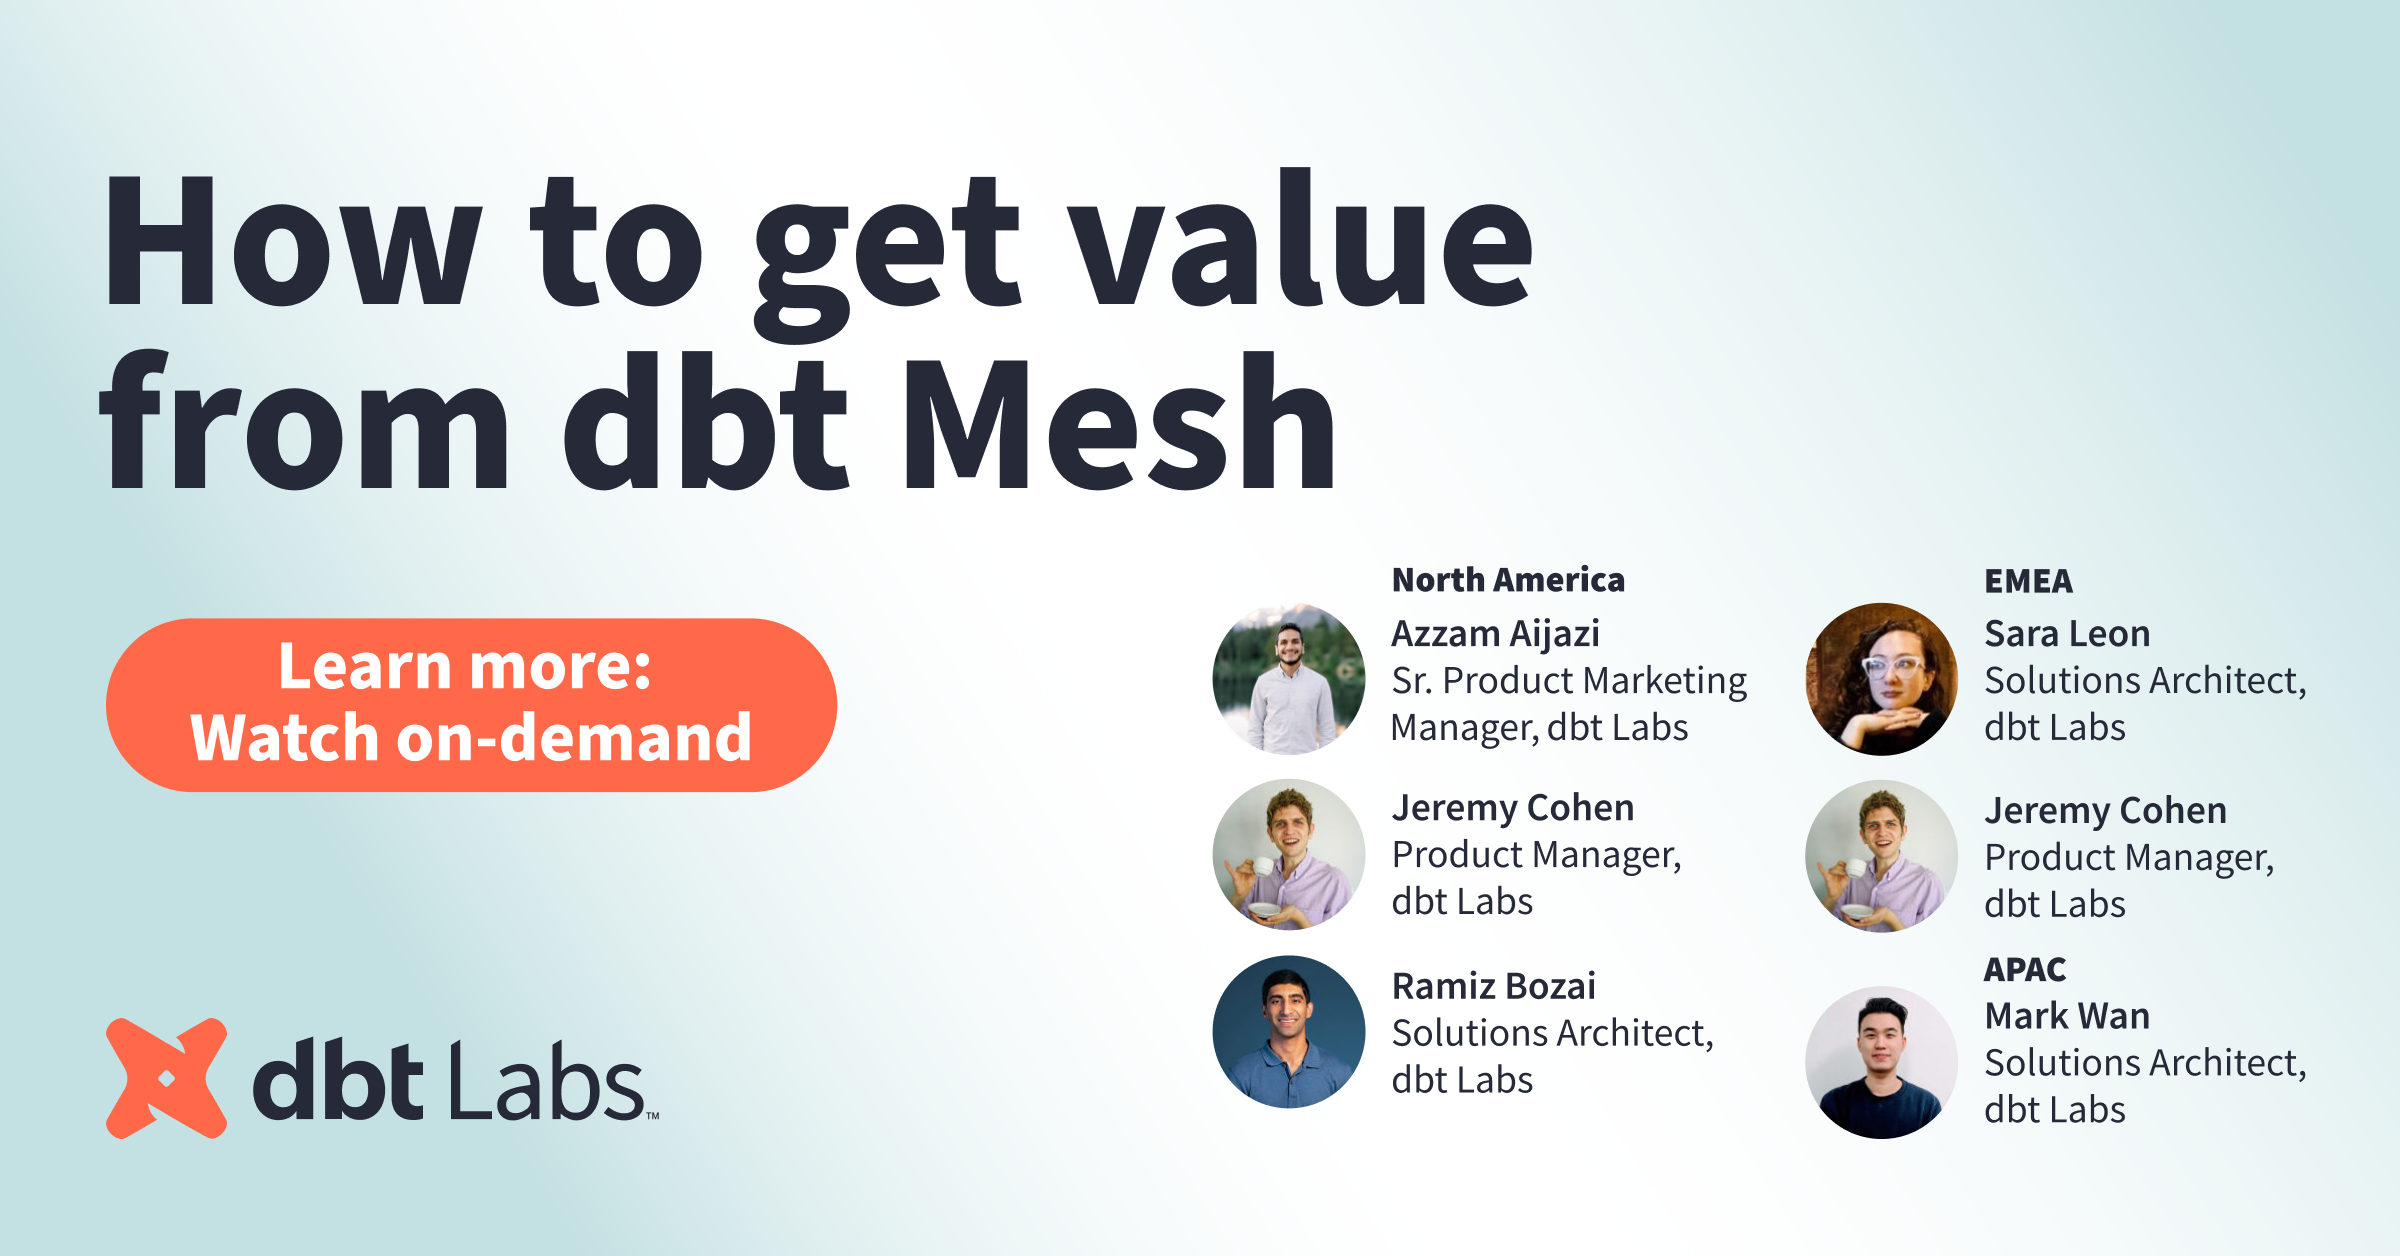 How to get value from dbt Mesh